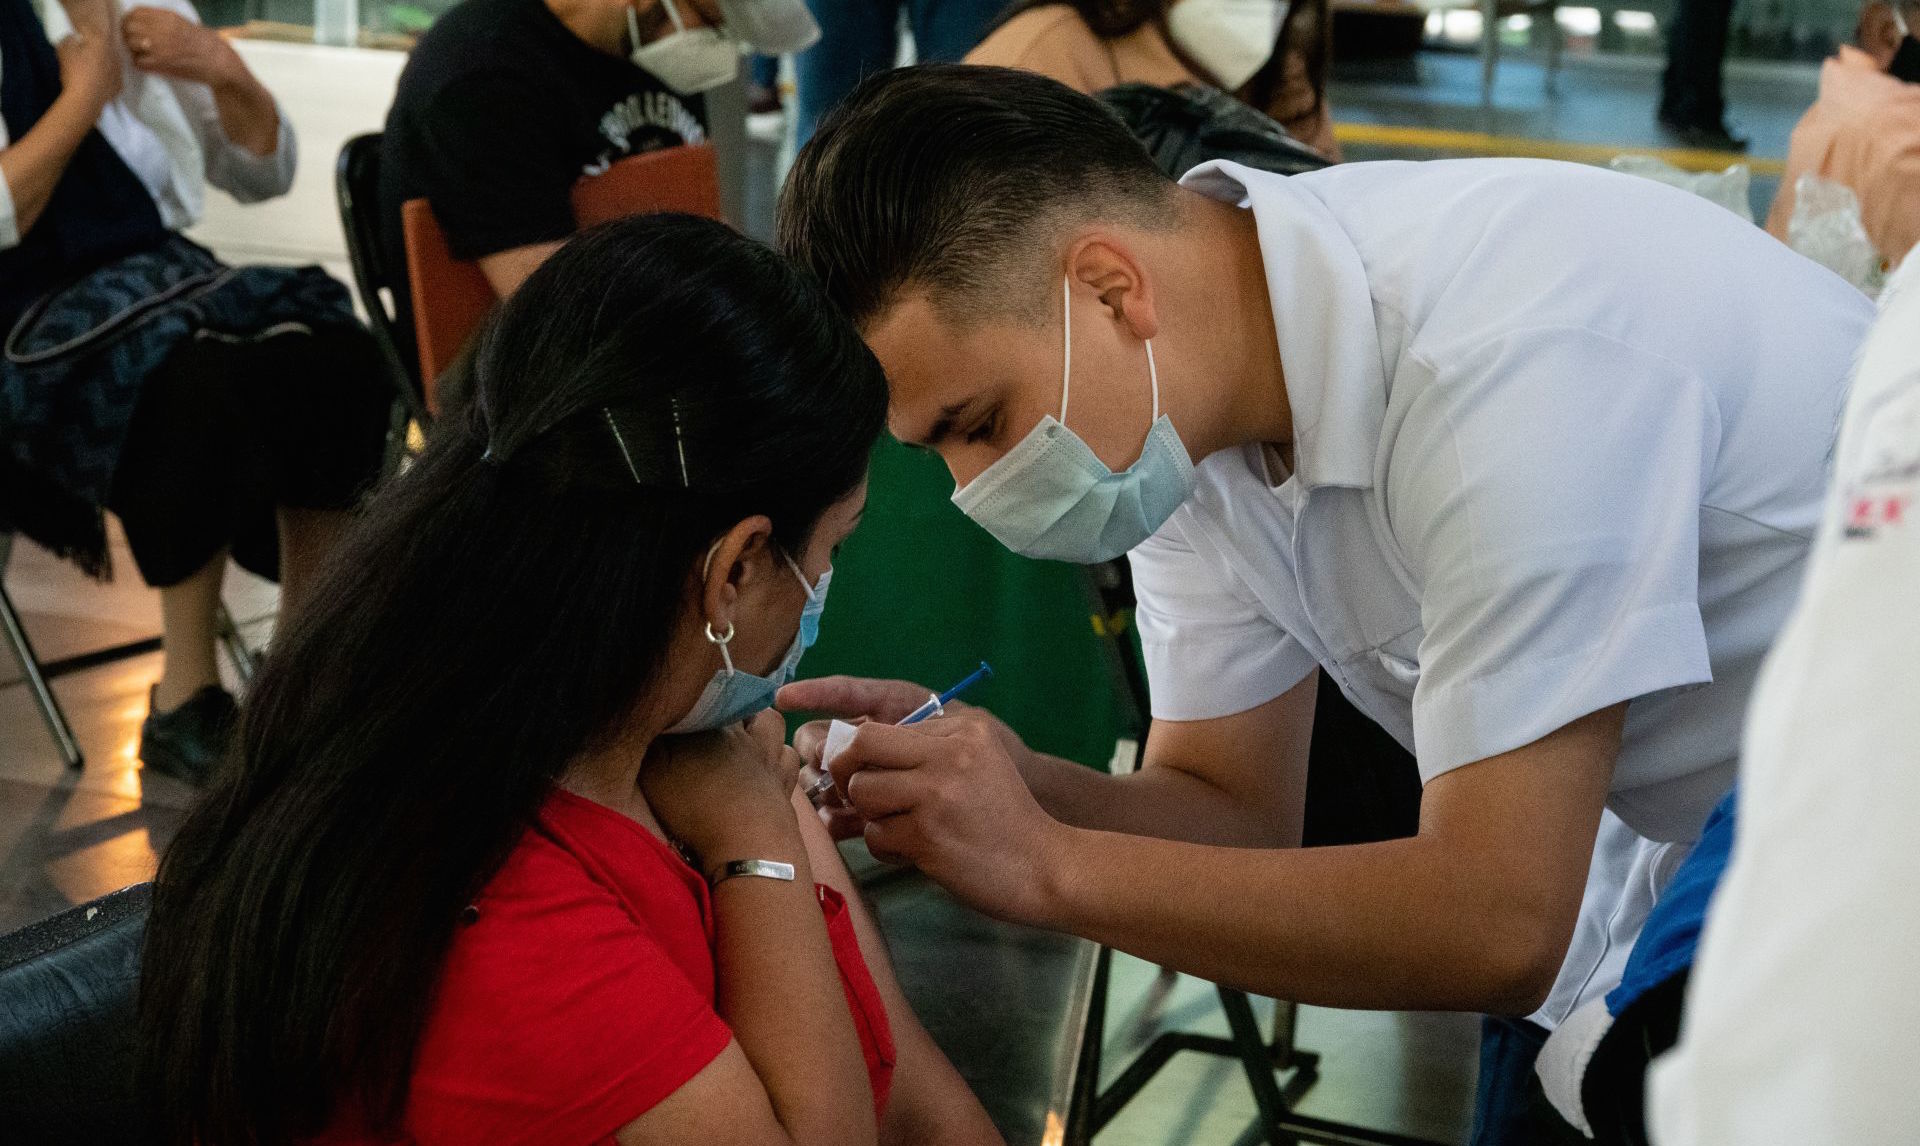 Edomex will apply first dose to people over 30 in 79 municipalities